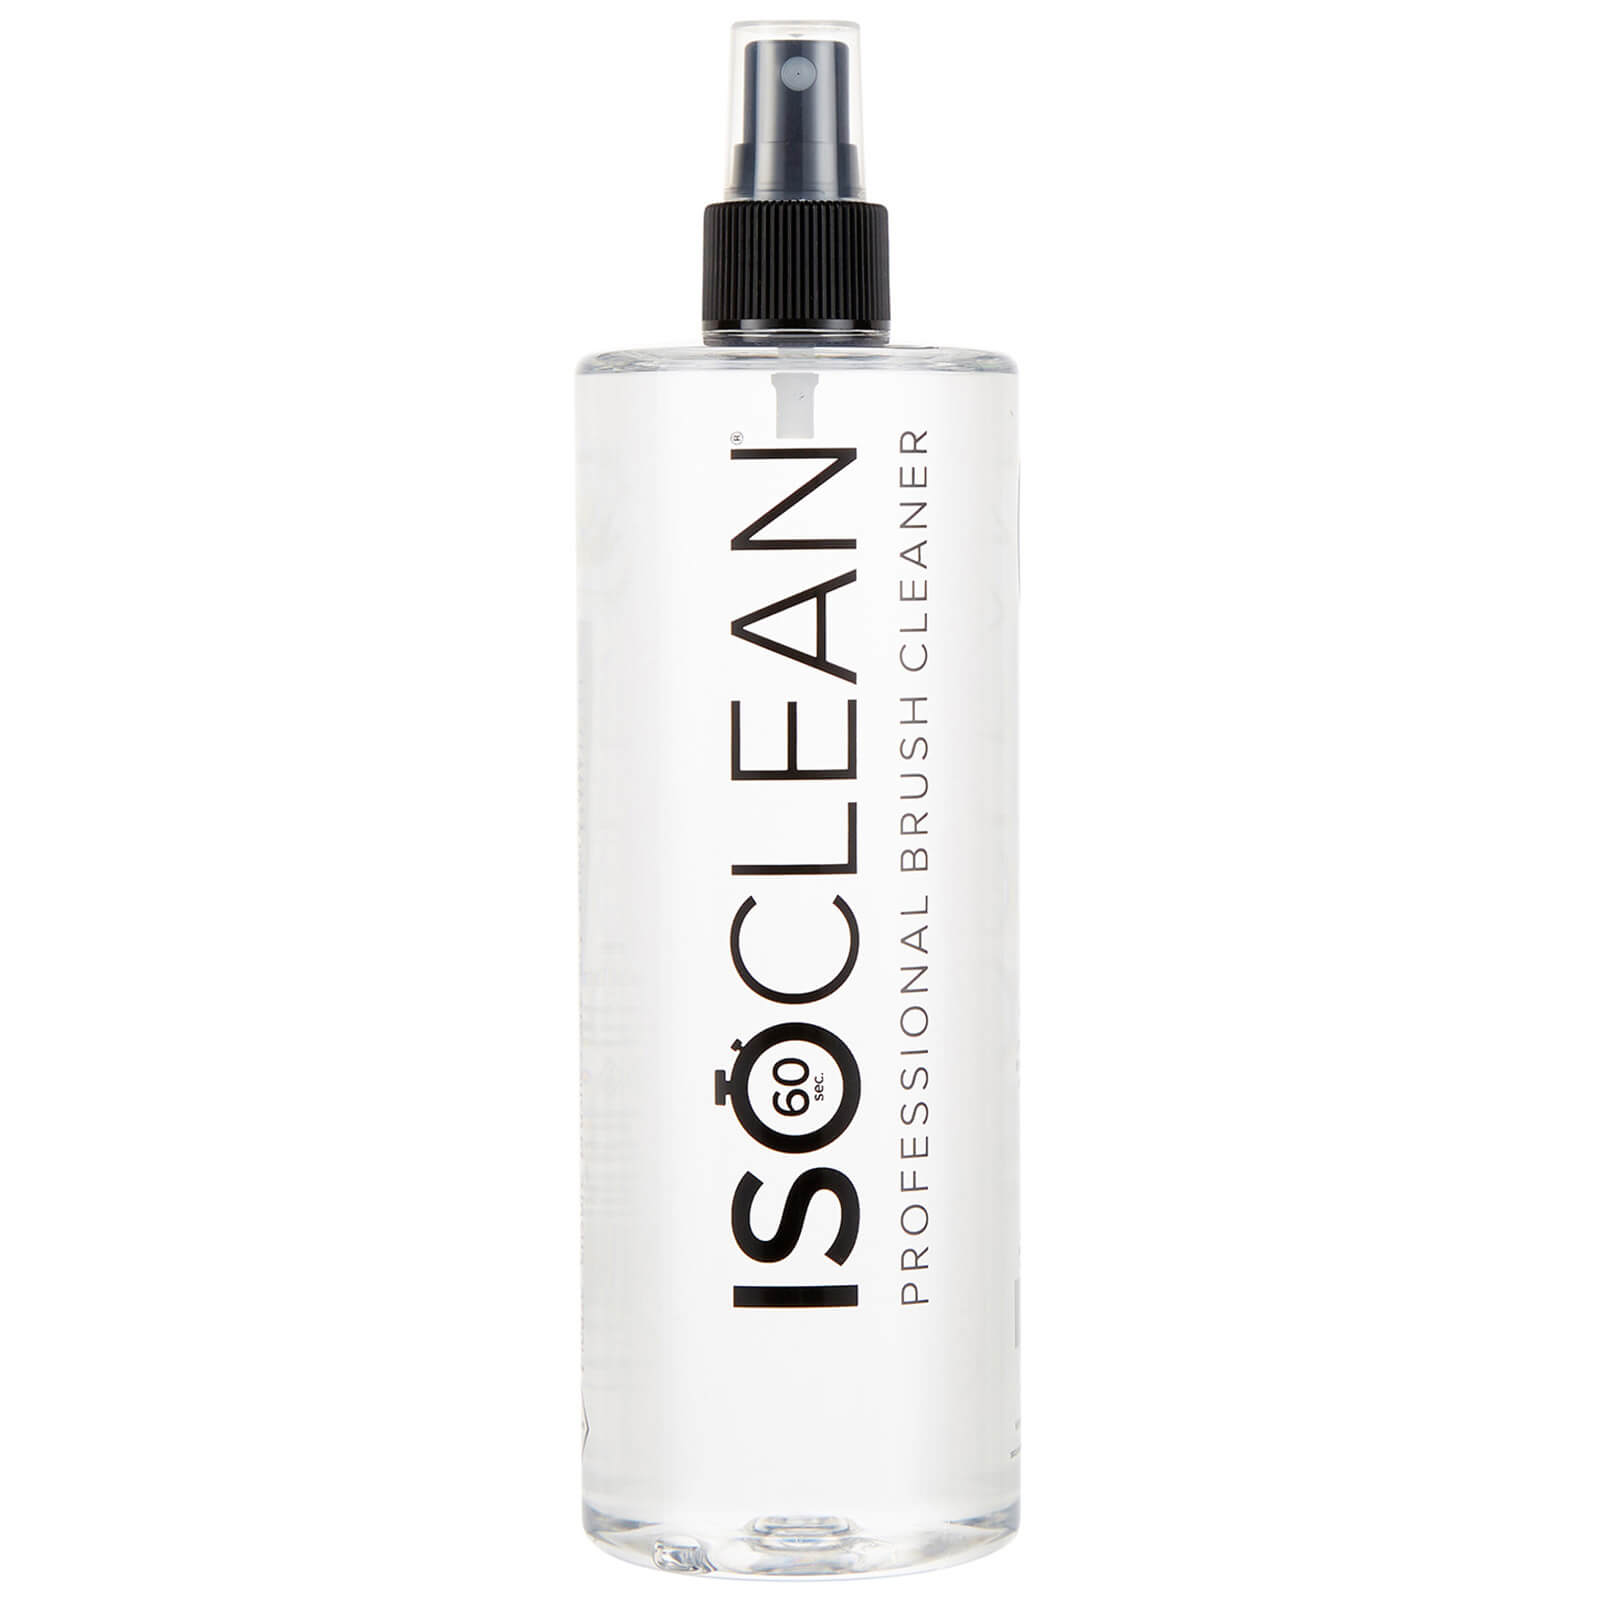 Photos - Makeup Brush / Sponge ISOCLEAN 'Enthusiast' Makeup Brush Cleaner with Spray Top 525ml ISOCLEAN1